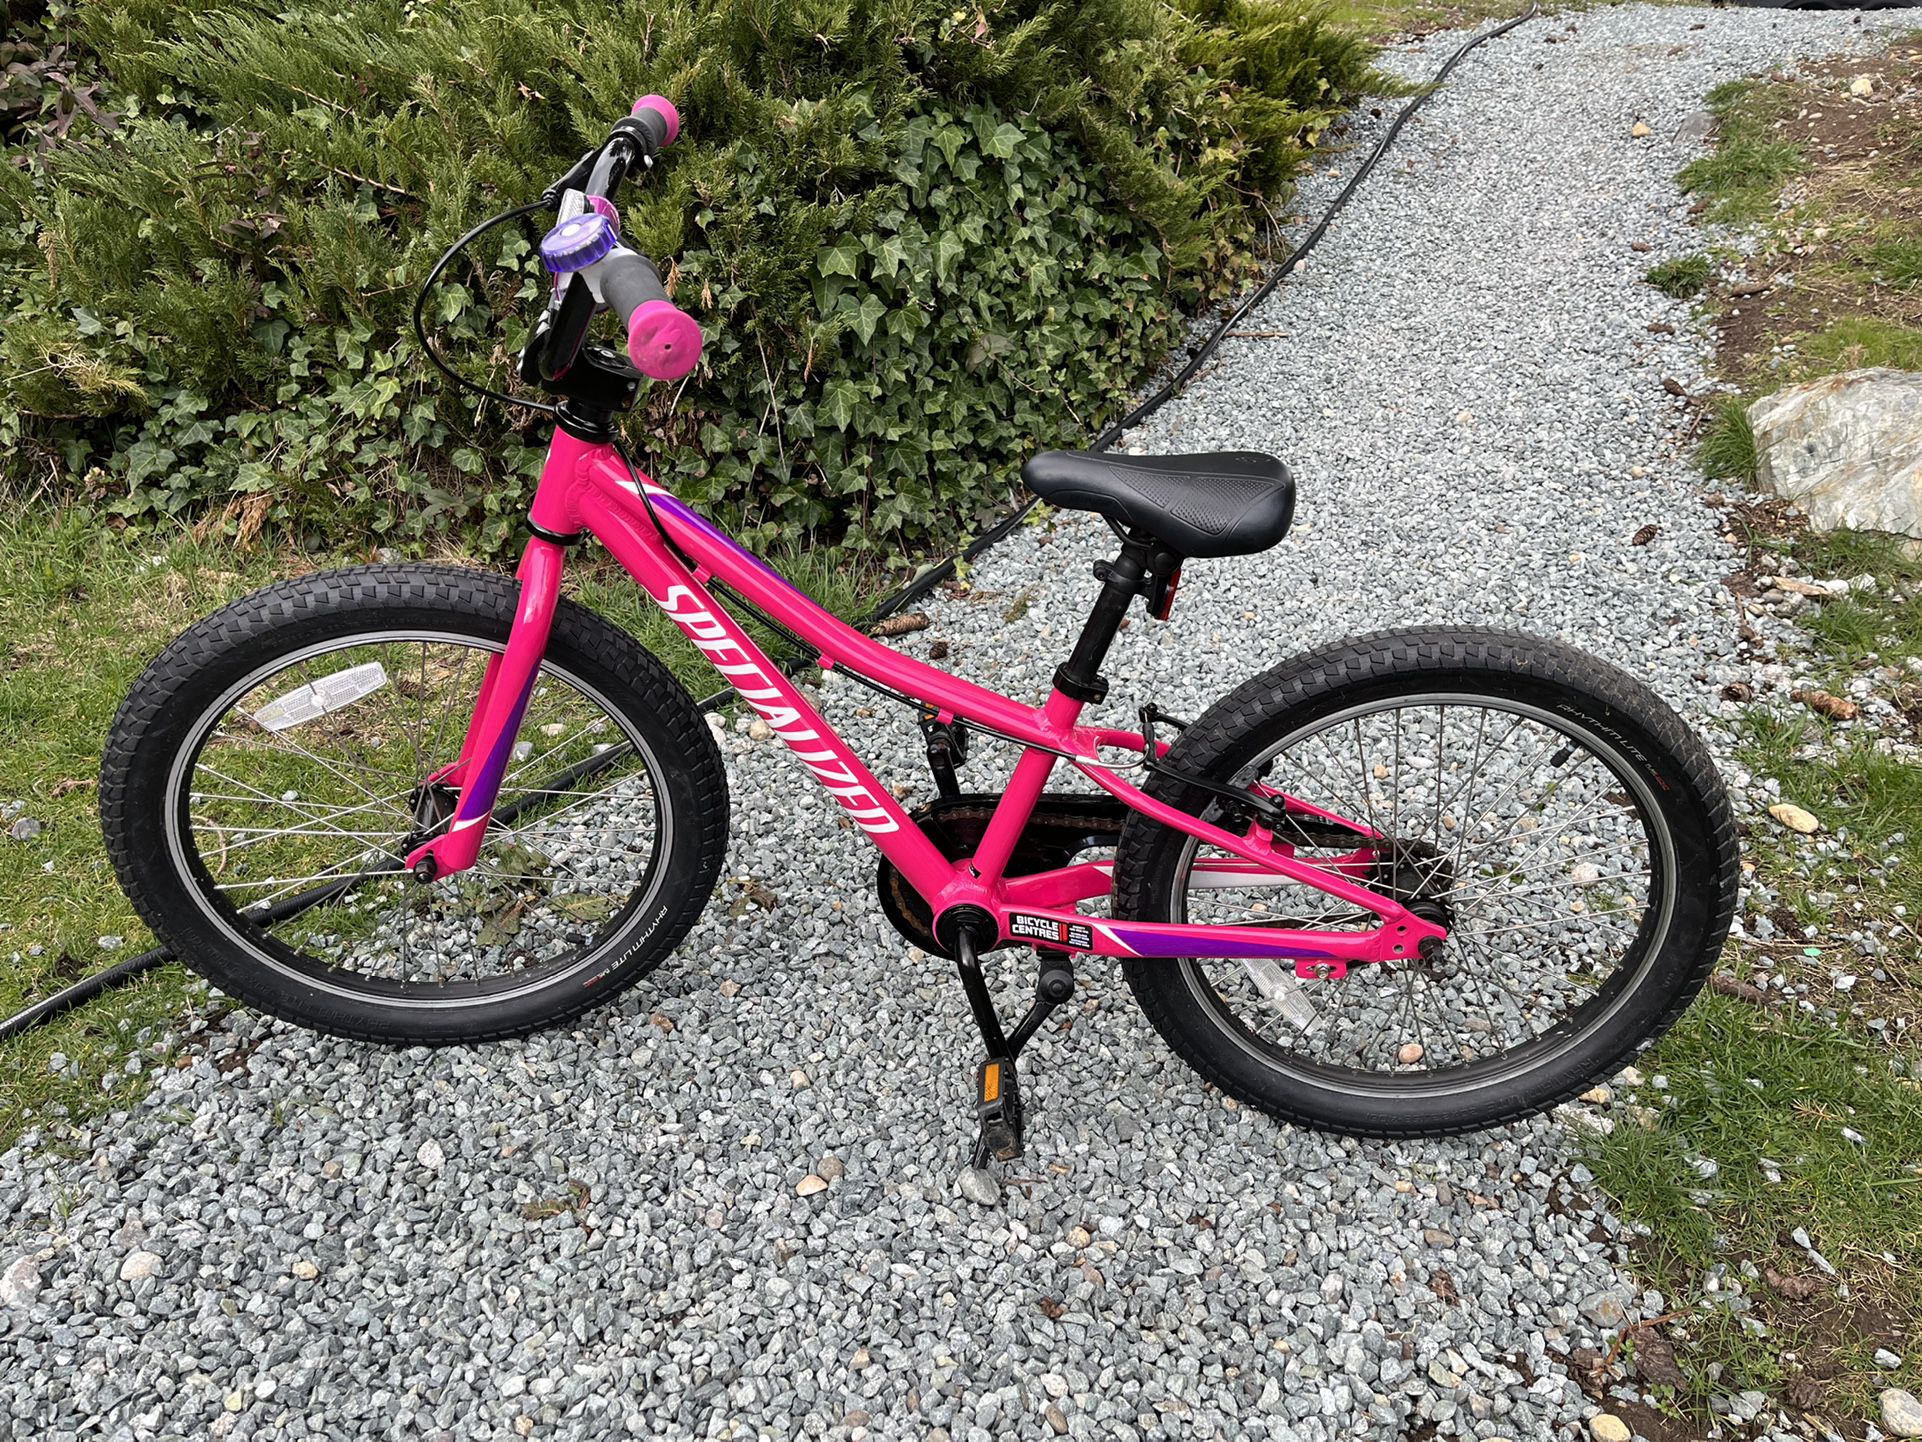 Specialized Kids Bike 16” - VERY GOOD CONDITION